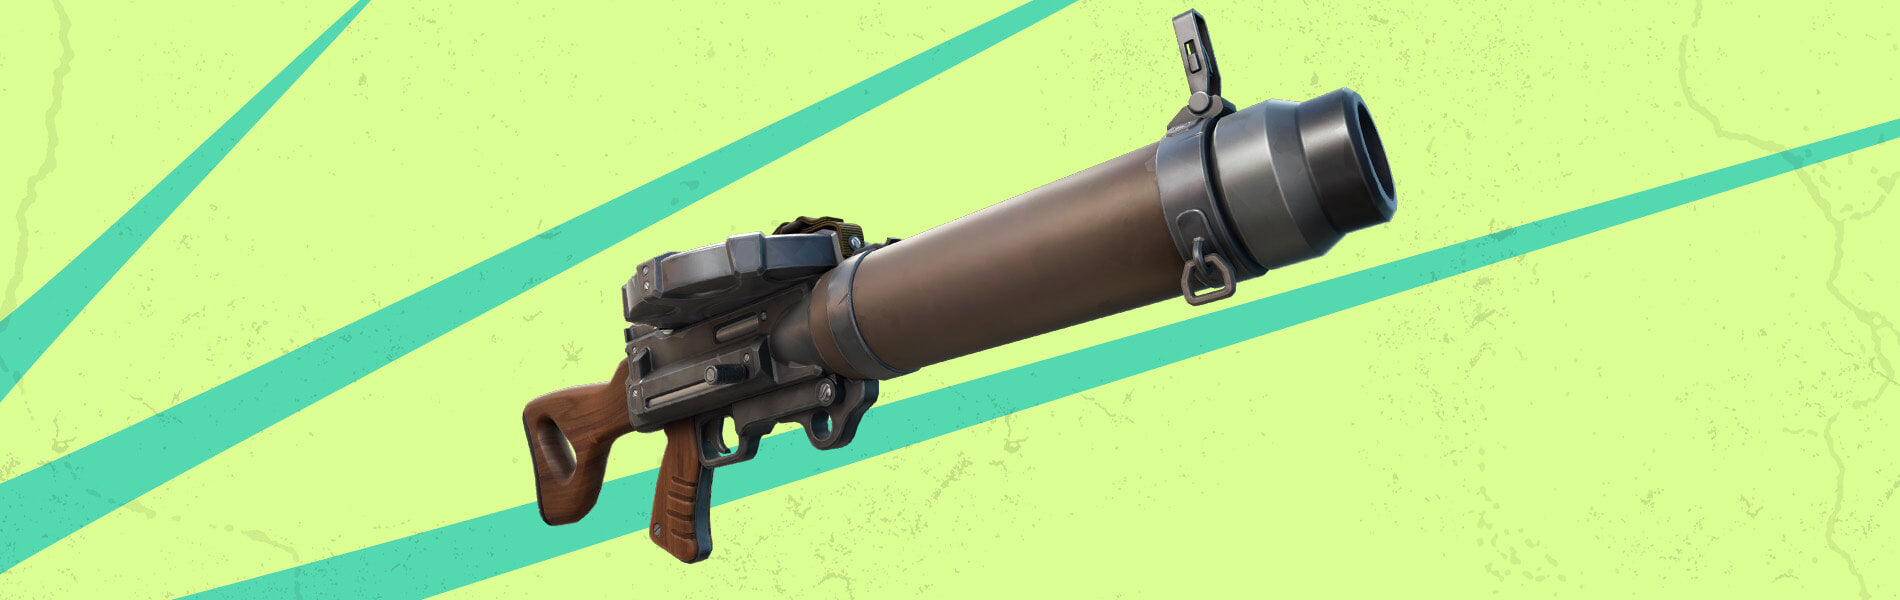 How to Make Sense of the Mid-Range Weapons in Fortnite Chapter 4 Season 3